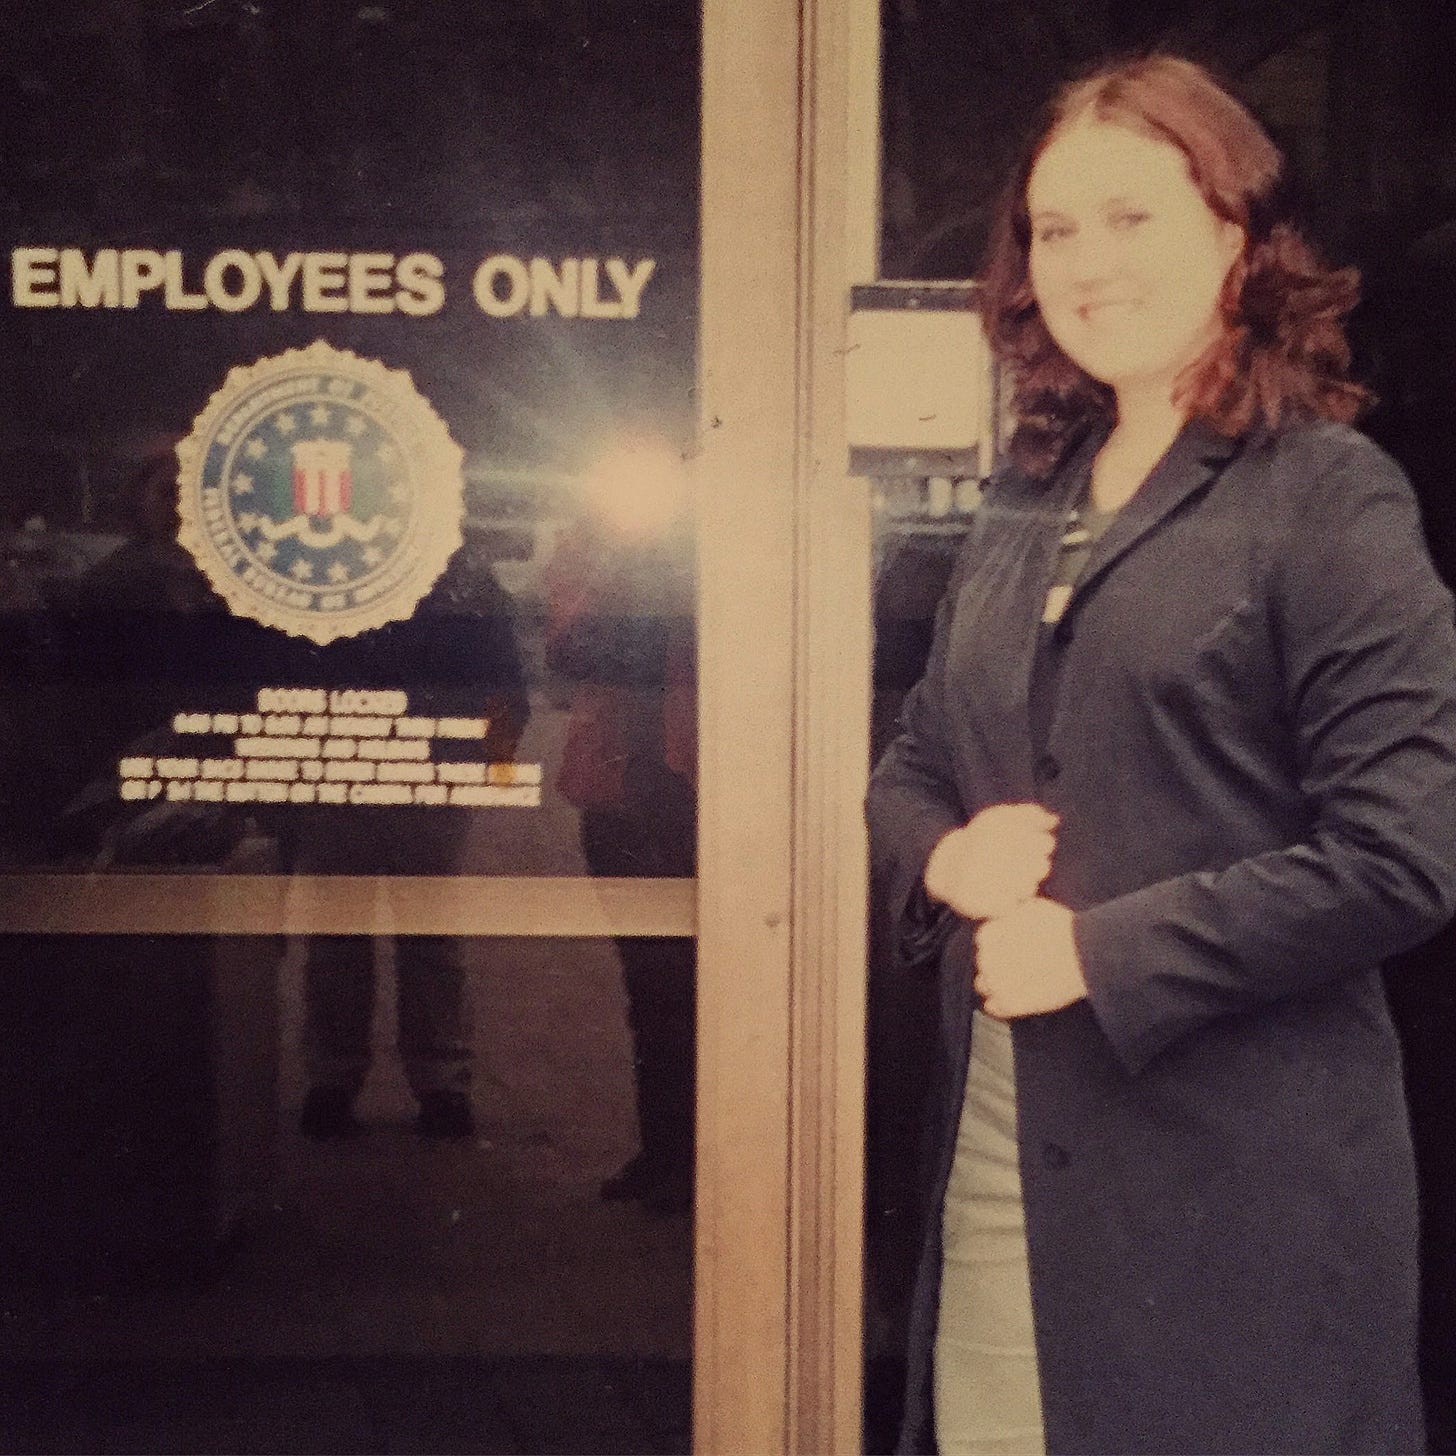 Me as a teen in front of an "Employees Only" door at the FBI Building in Washington, DC. I am wearing a black trench coat and have dyed auburn hair.